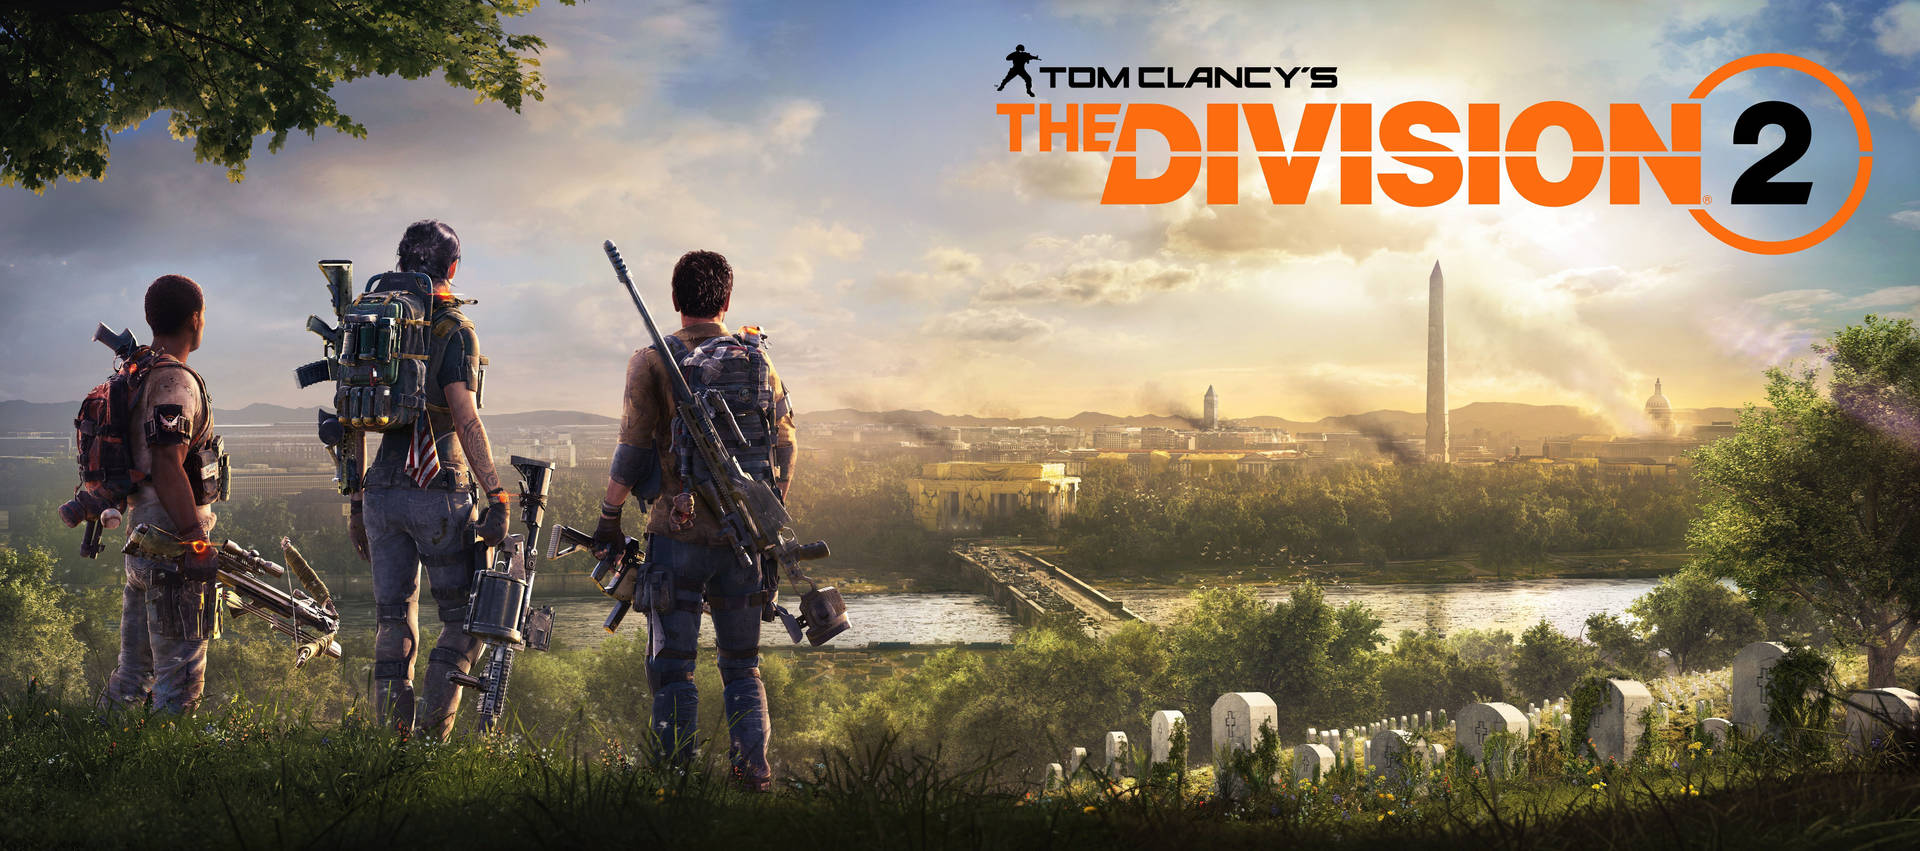 The Division 2 Sunset Doomed City Background